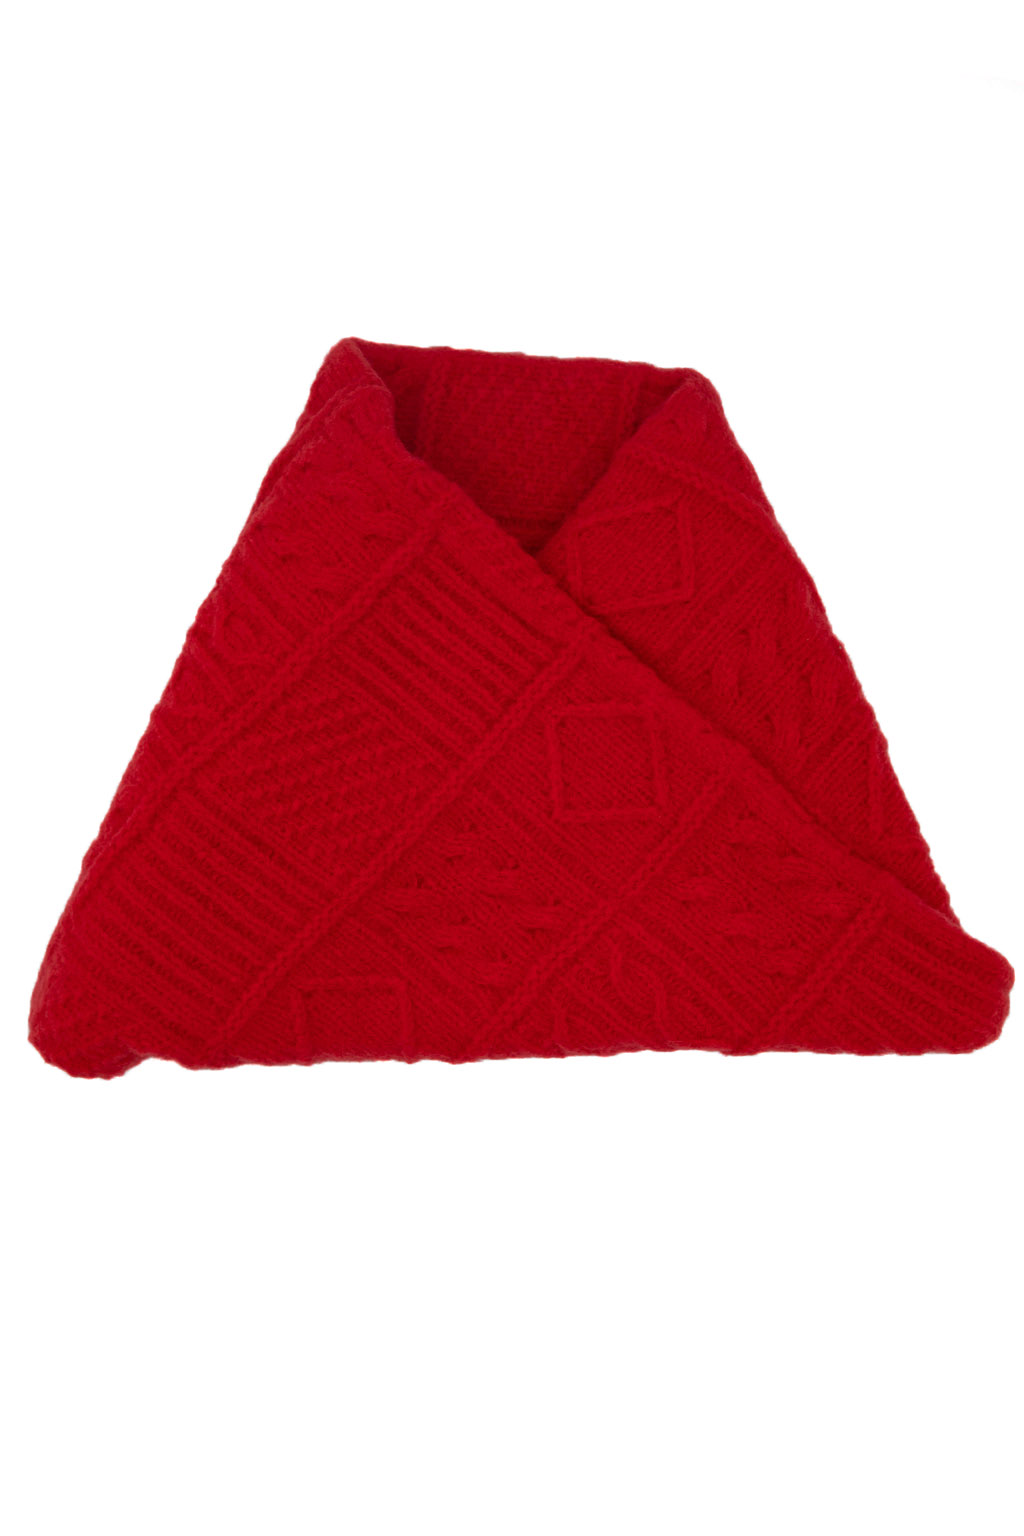 Tehtava Cable Snood in 3 color choices